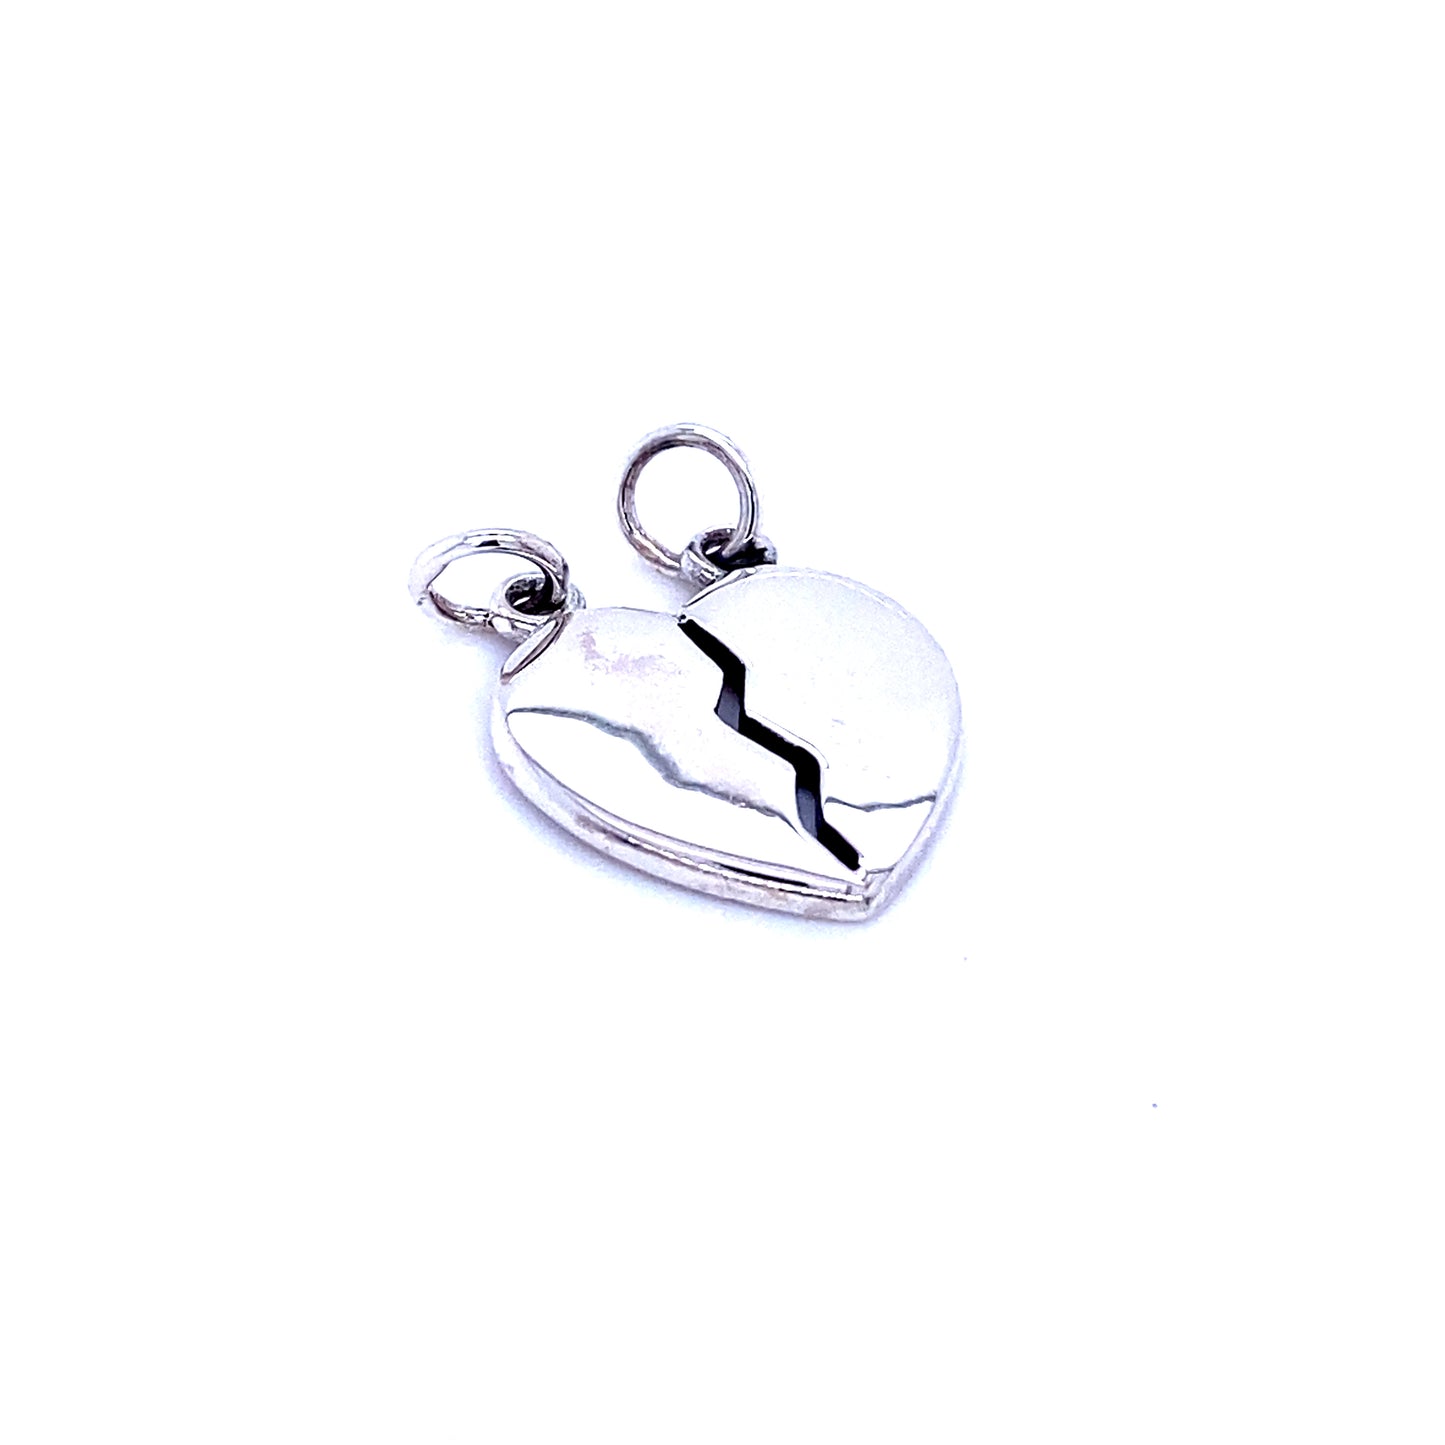 A customizable Plain Heart Break Apart Charm crafted from .925 Sterling Silver, showcased on a pristine white background. (Brand: Super Silver)